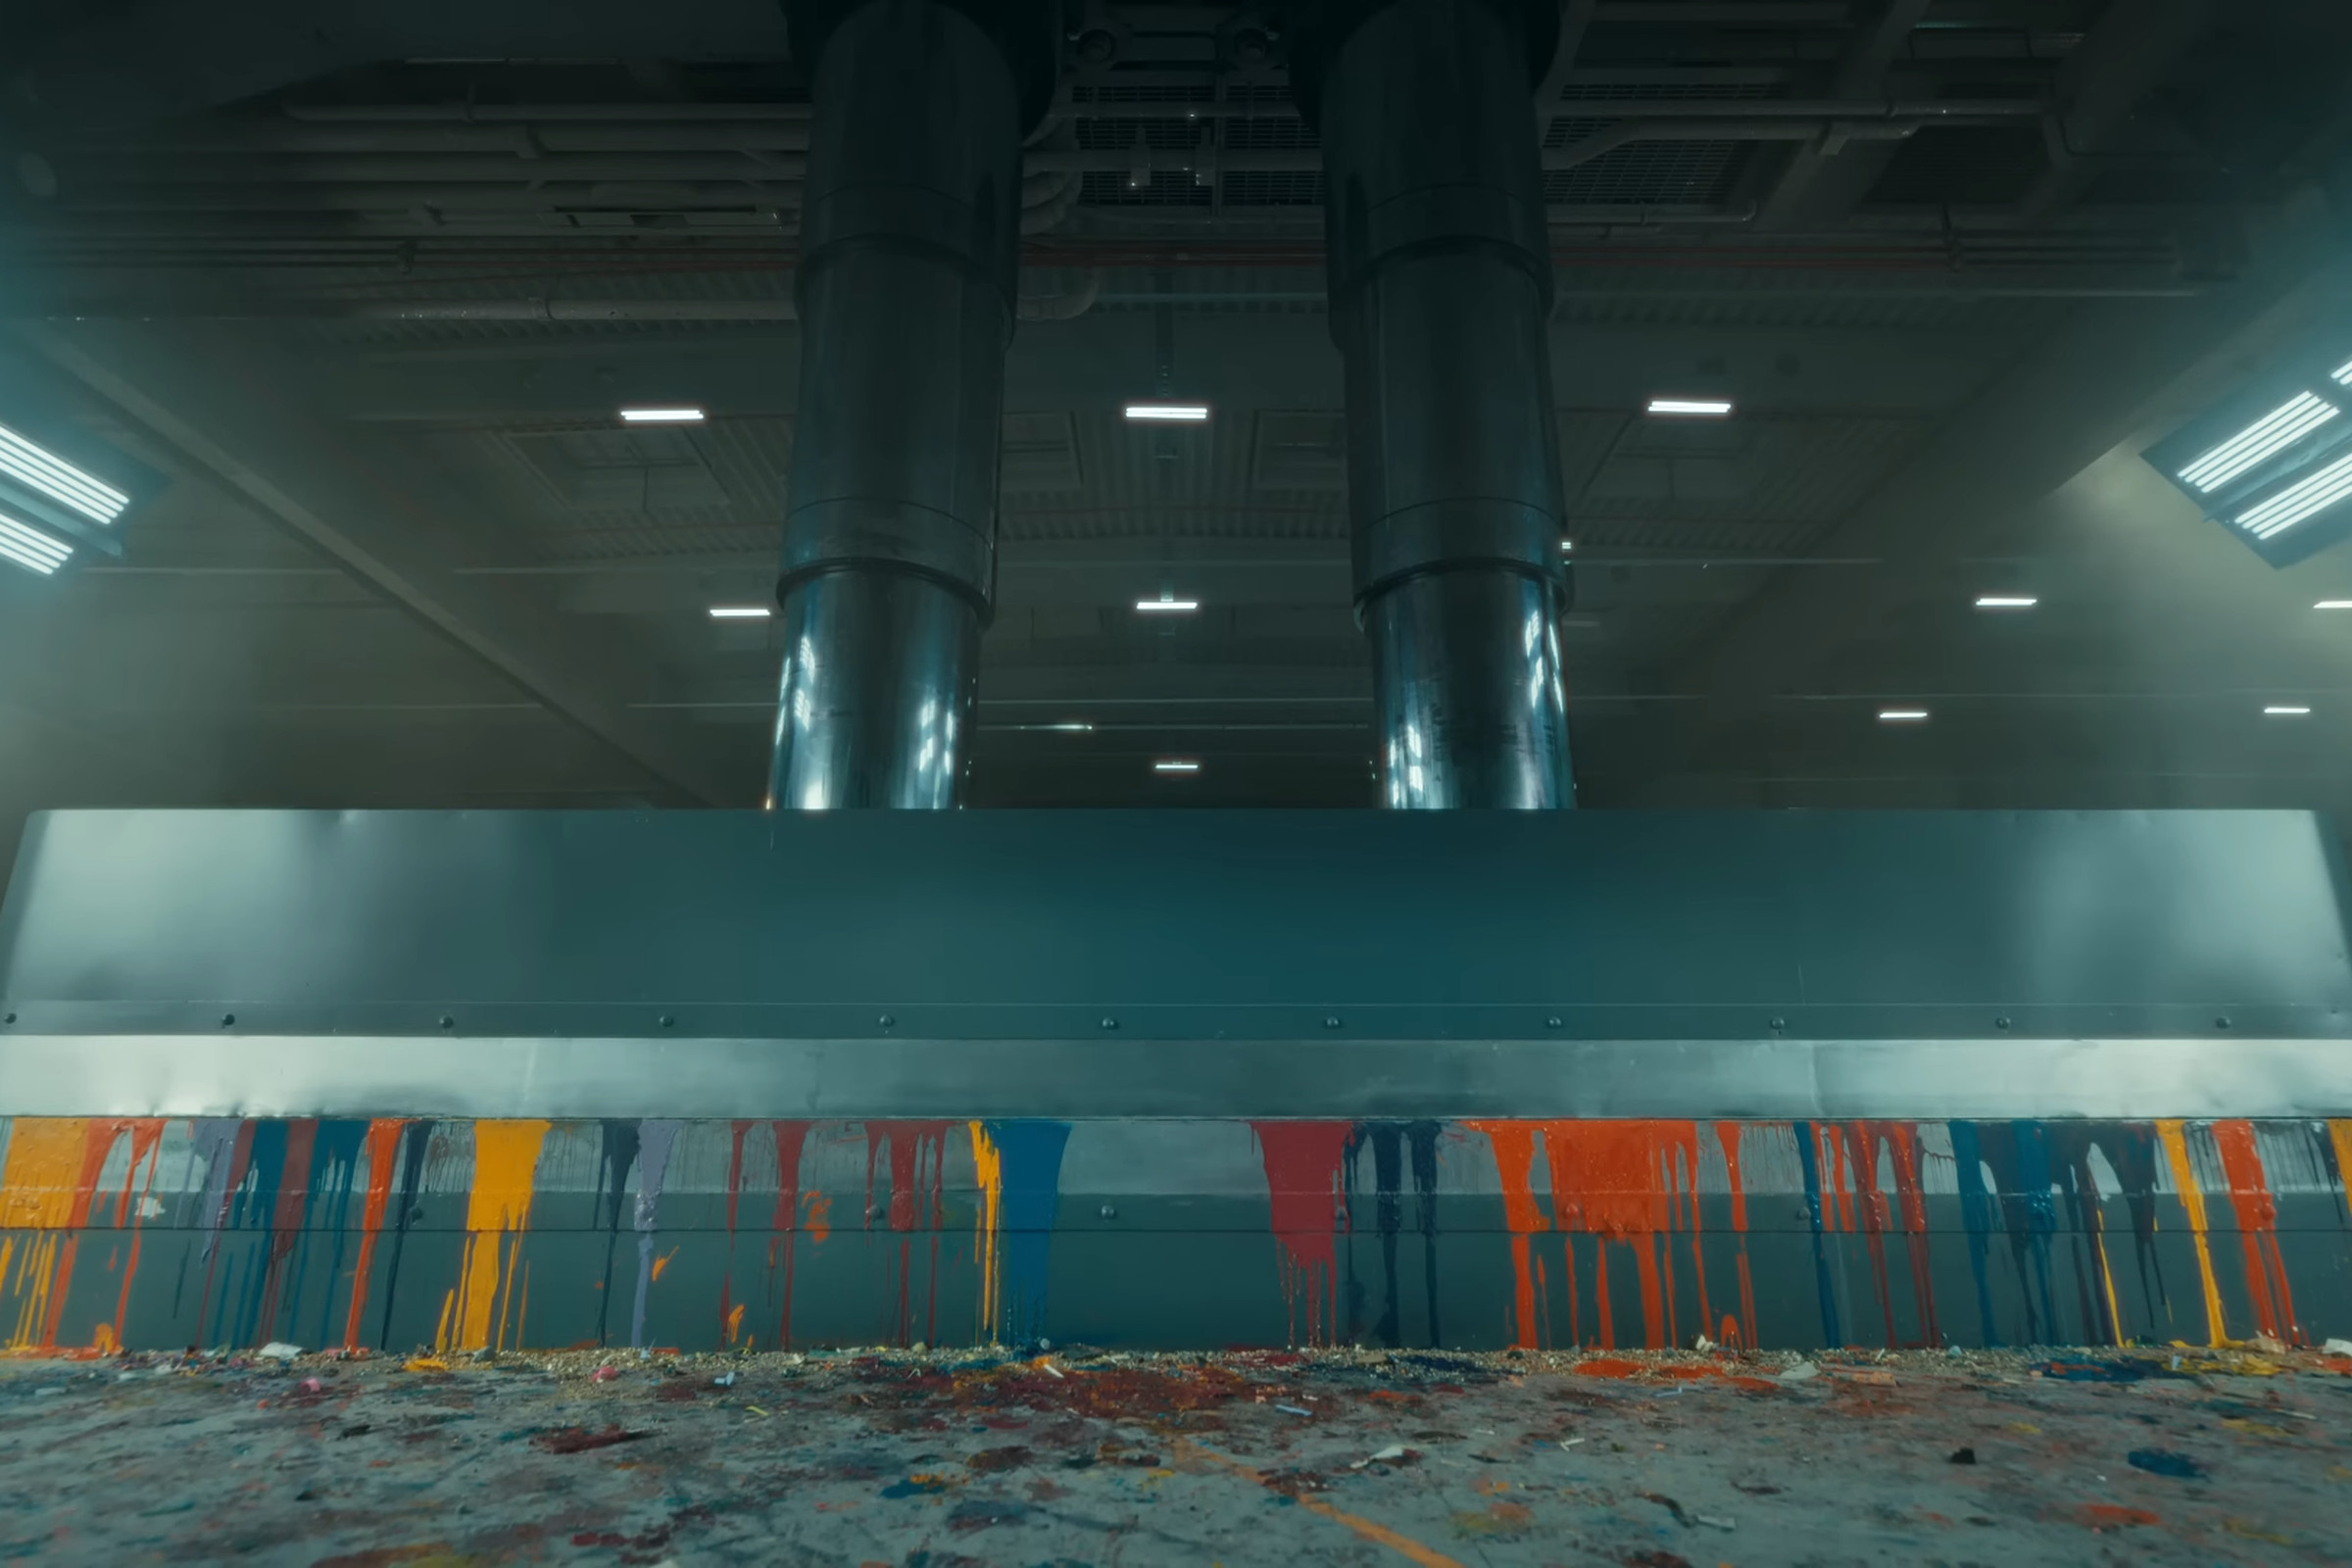 Still image from the “Crush” iPad ad with the press fully closed and only dripping paint and small debris visible outside.